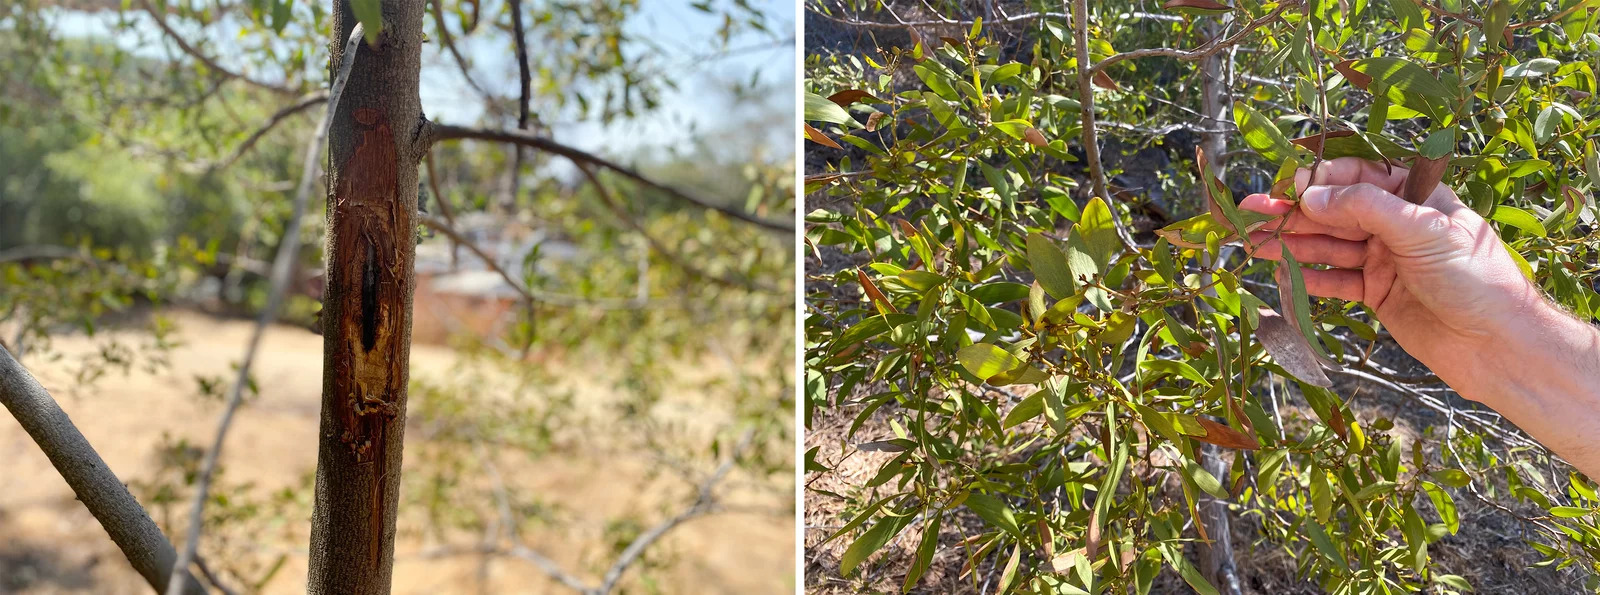 On the left is a photo of a dead acacia tree with an eye-shaped hole. On the right, a hand touches the branches of a dying acacia tree.